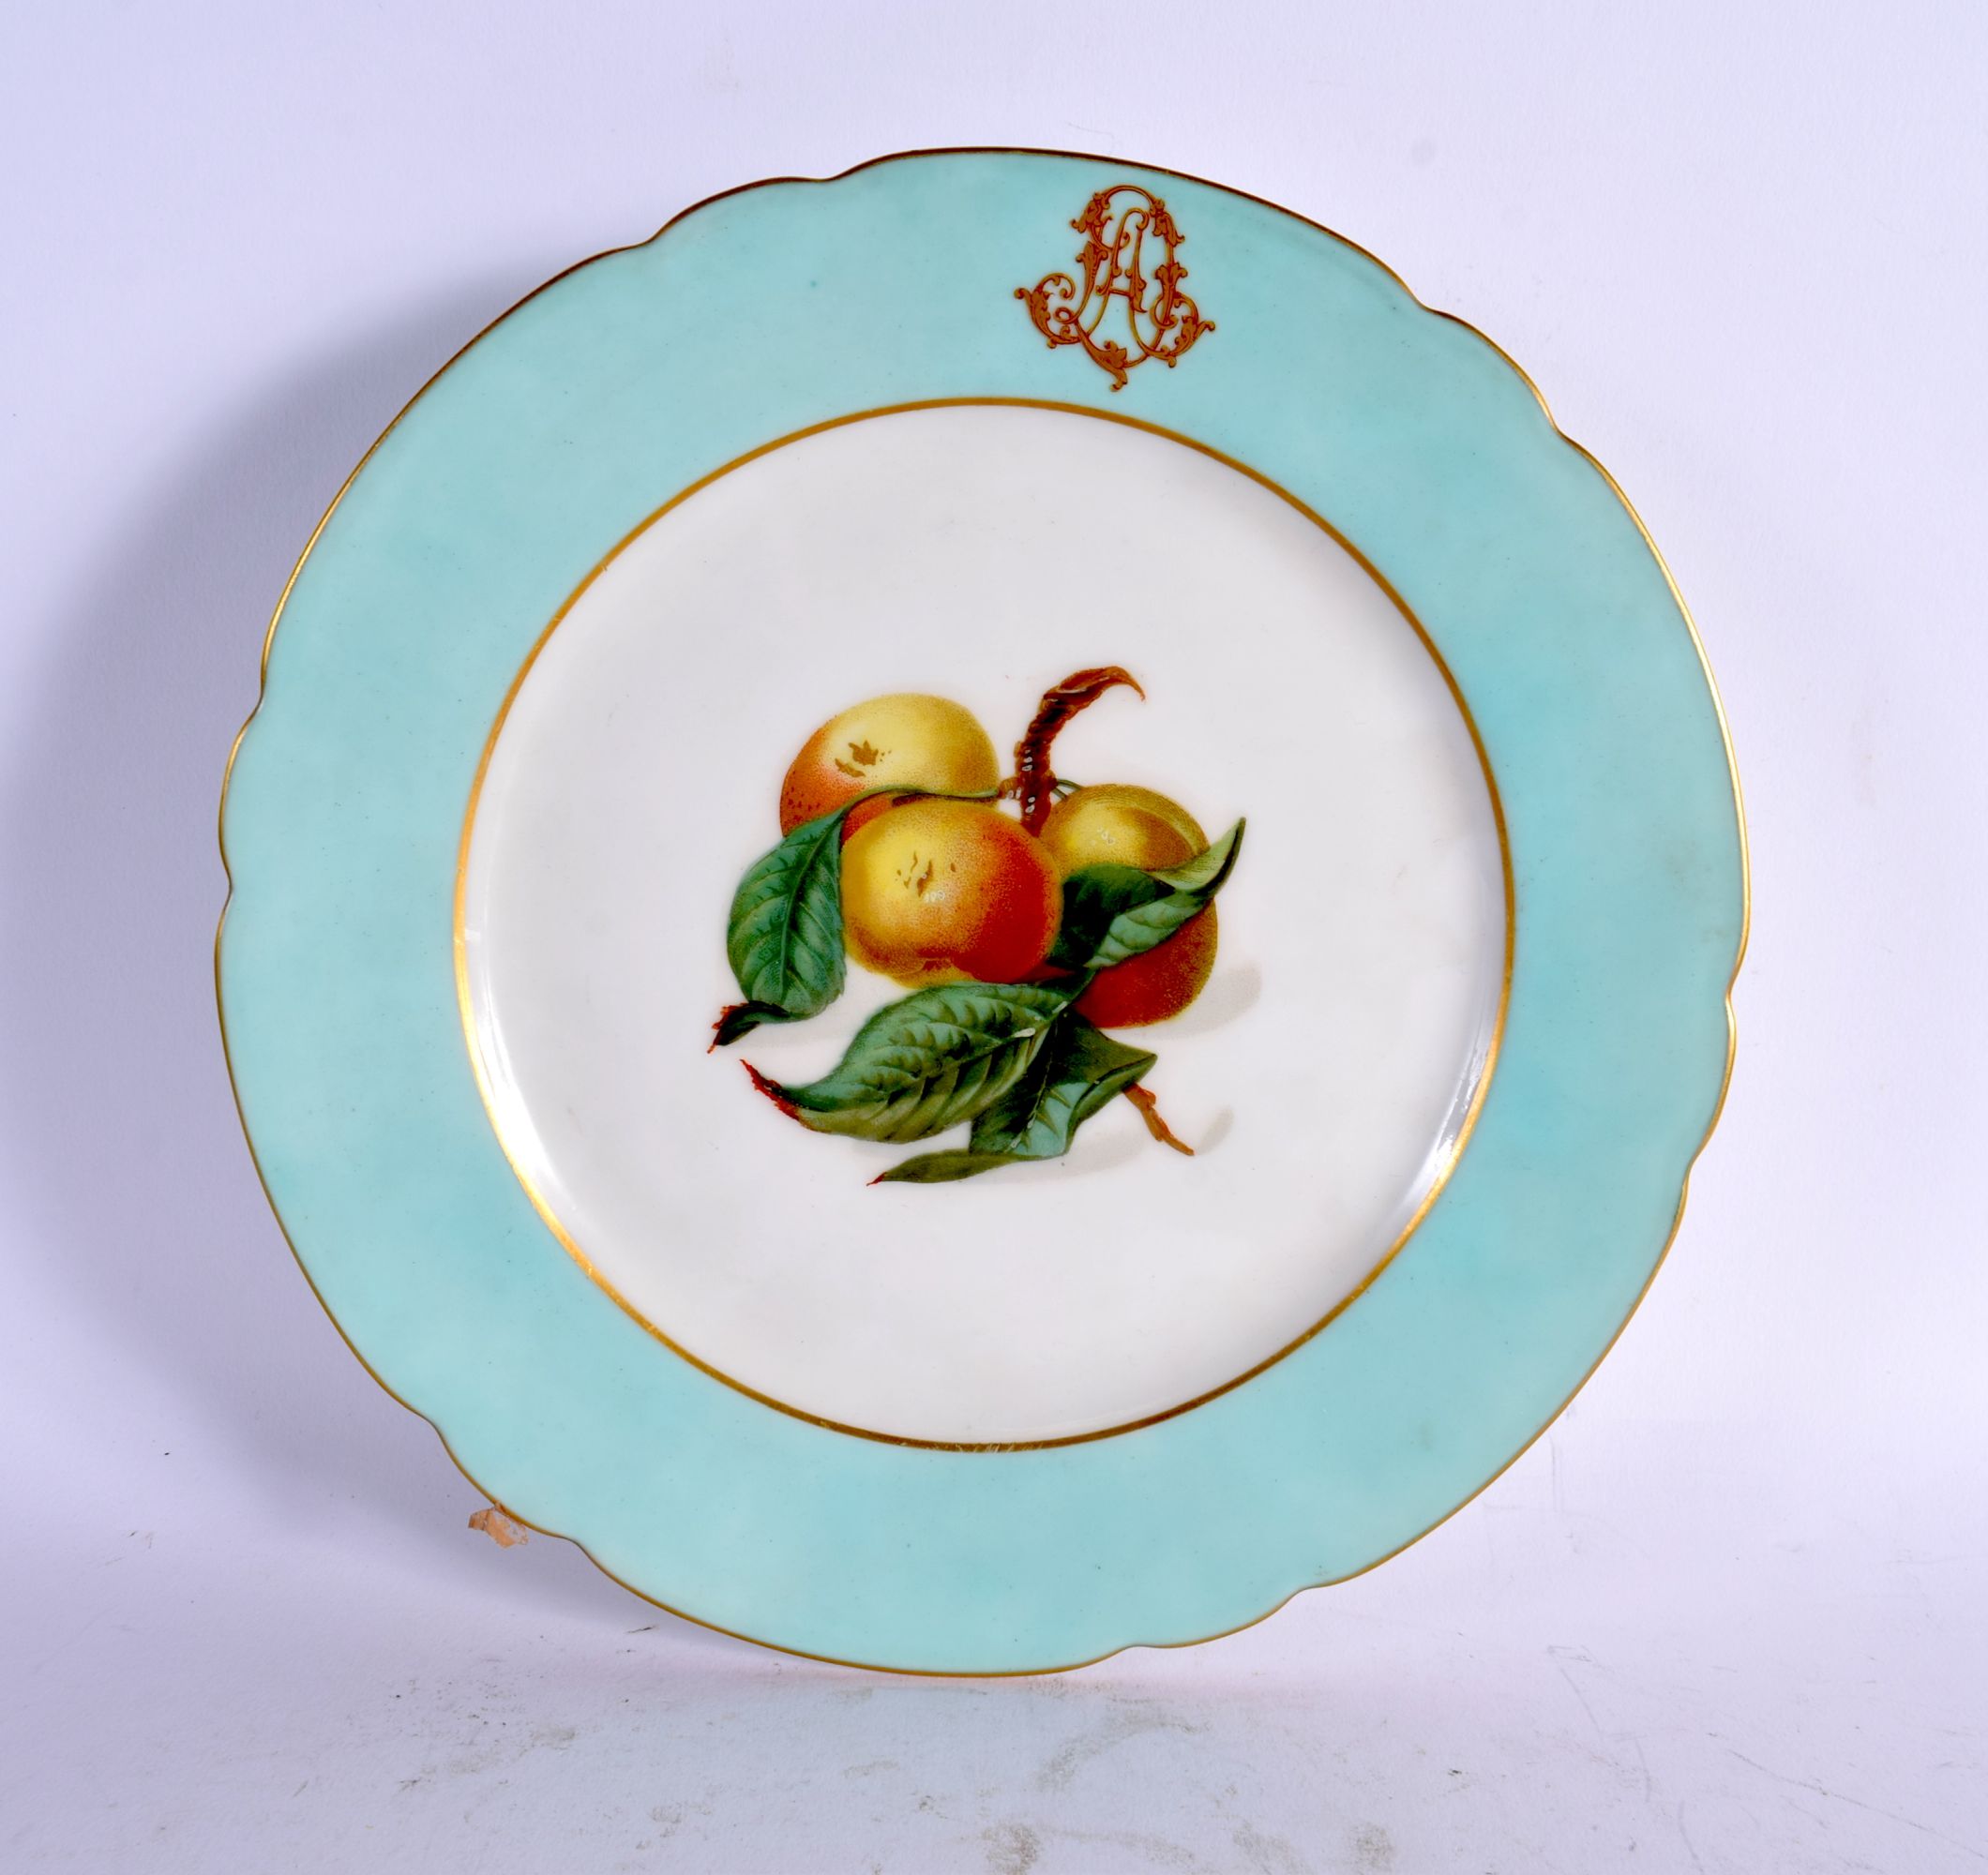 A LARGE AND EXTENSIVE LATE 19TH CENTURY FRENCH PORCELAIN DINNER SERVICE painted with a monogram. Lar - Image 6 of 14